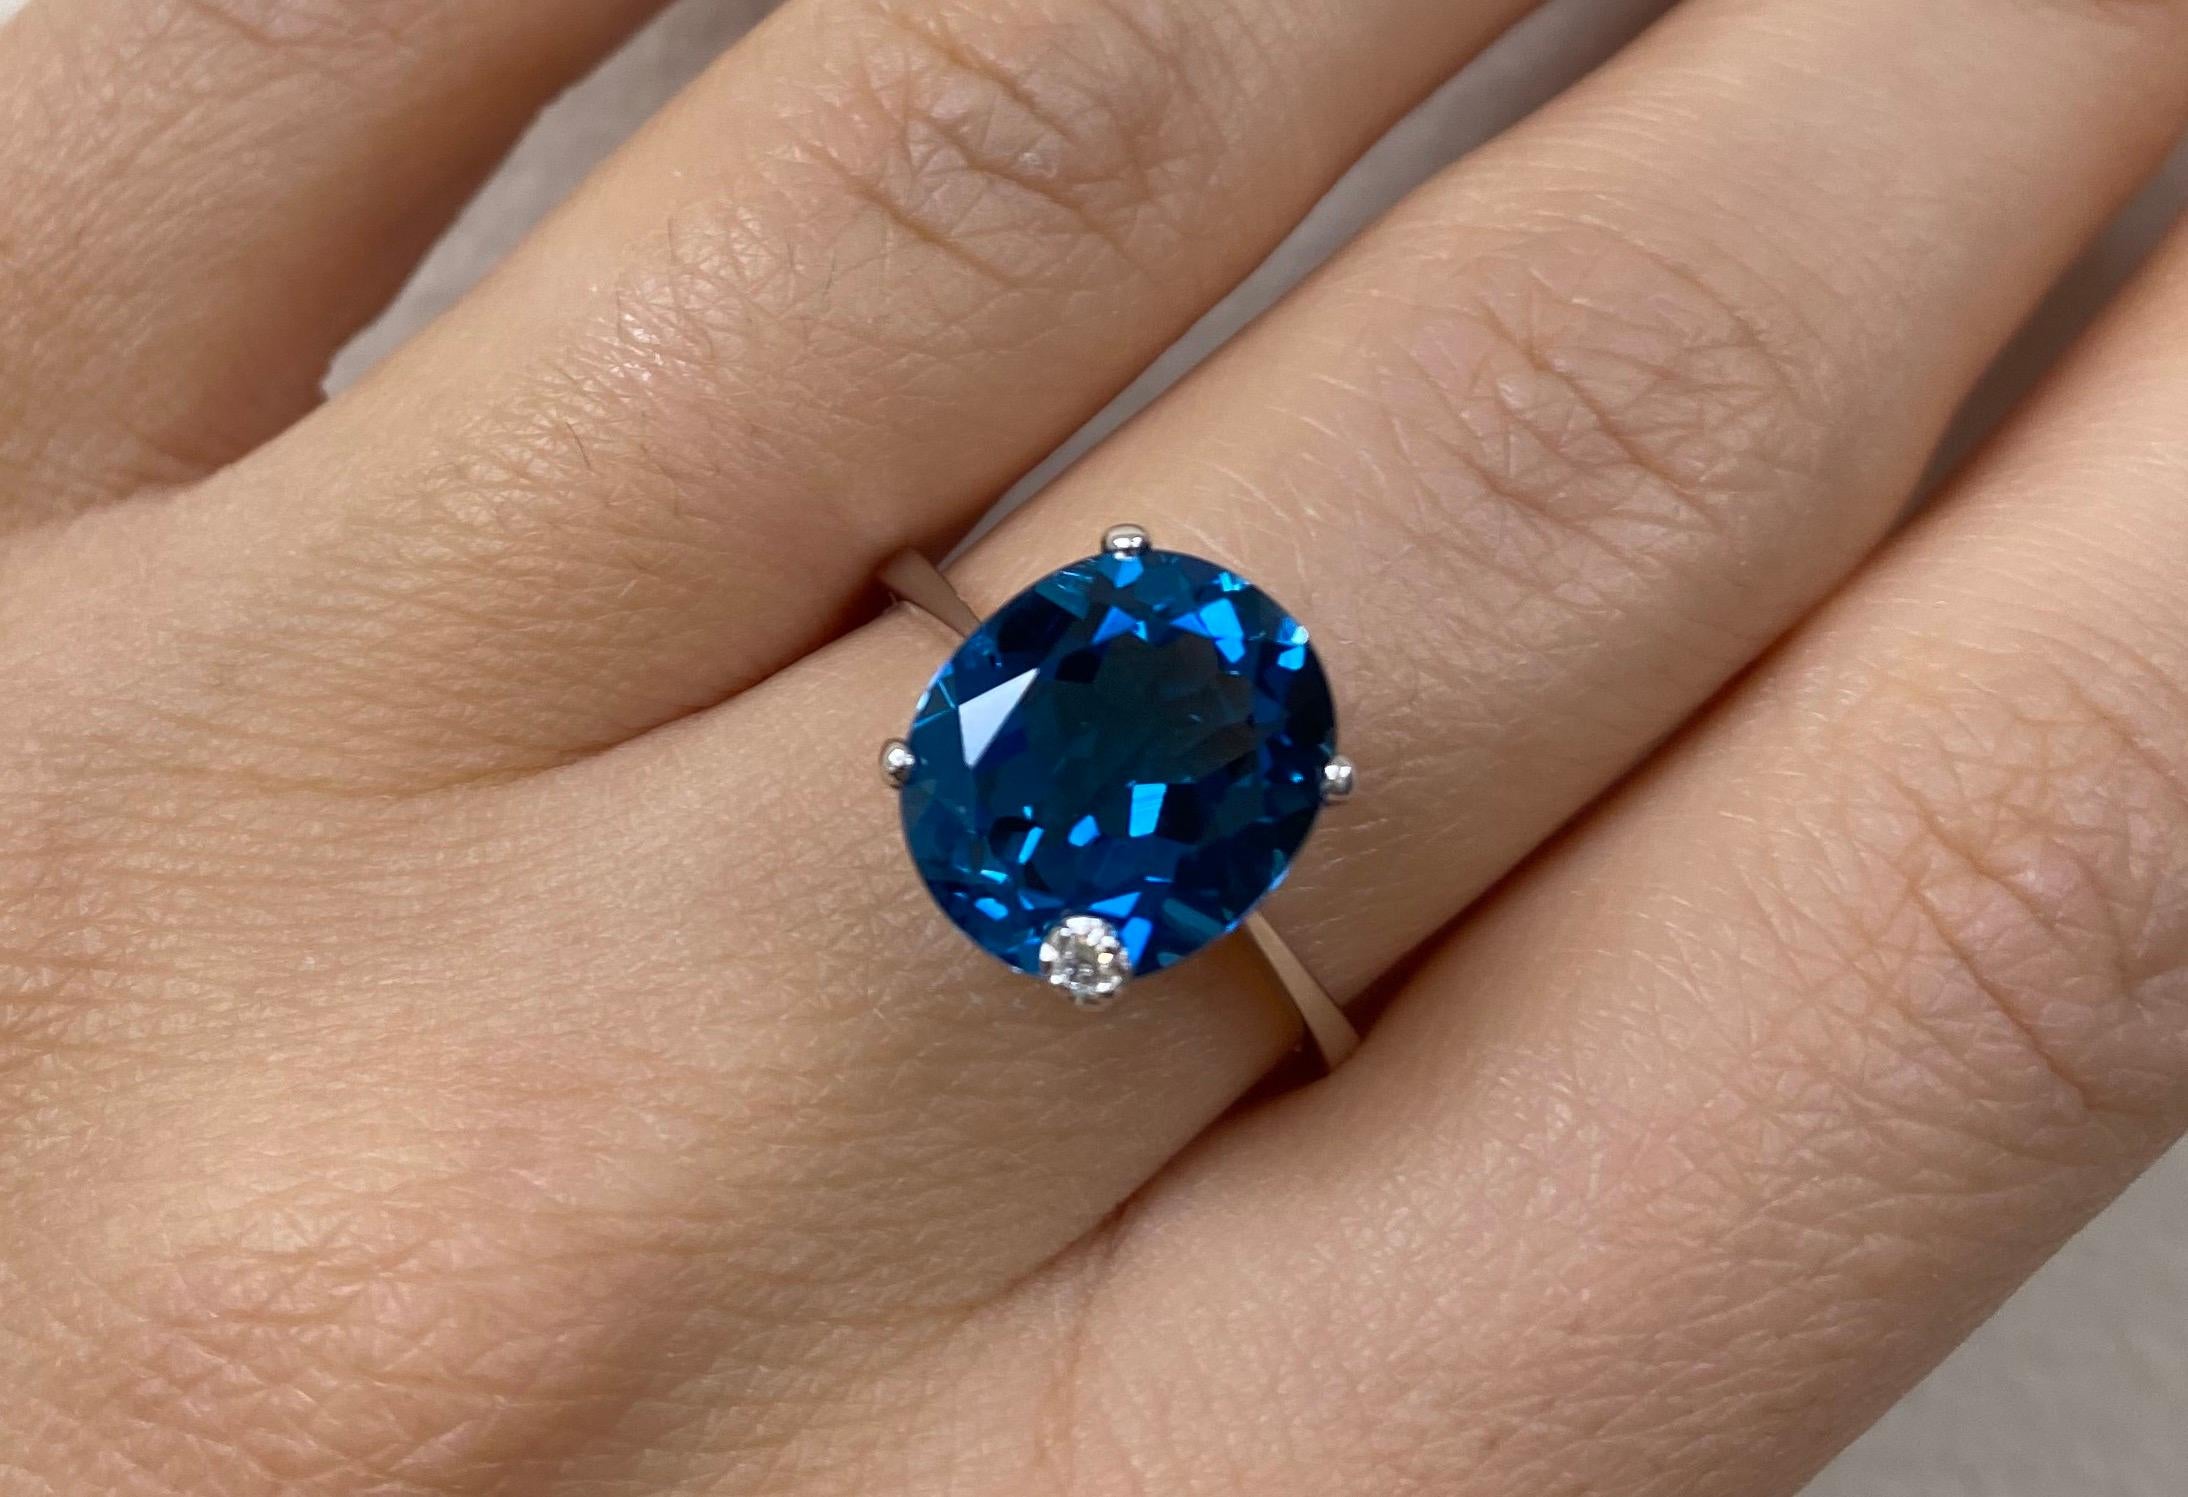 Material: 14k White Gold 
Center Stone Details: 1 Oval Blue Topaz at 5.81 Carats - Measuring 12 x 10mm
Diamond Details: 1 Round White Diamond at 0.02 Carats - SI Clarity / H-I Color 
Alberto offers complimentary sizing on all rings.

Fine one-of-a